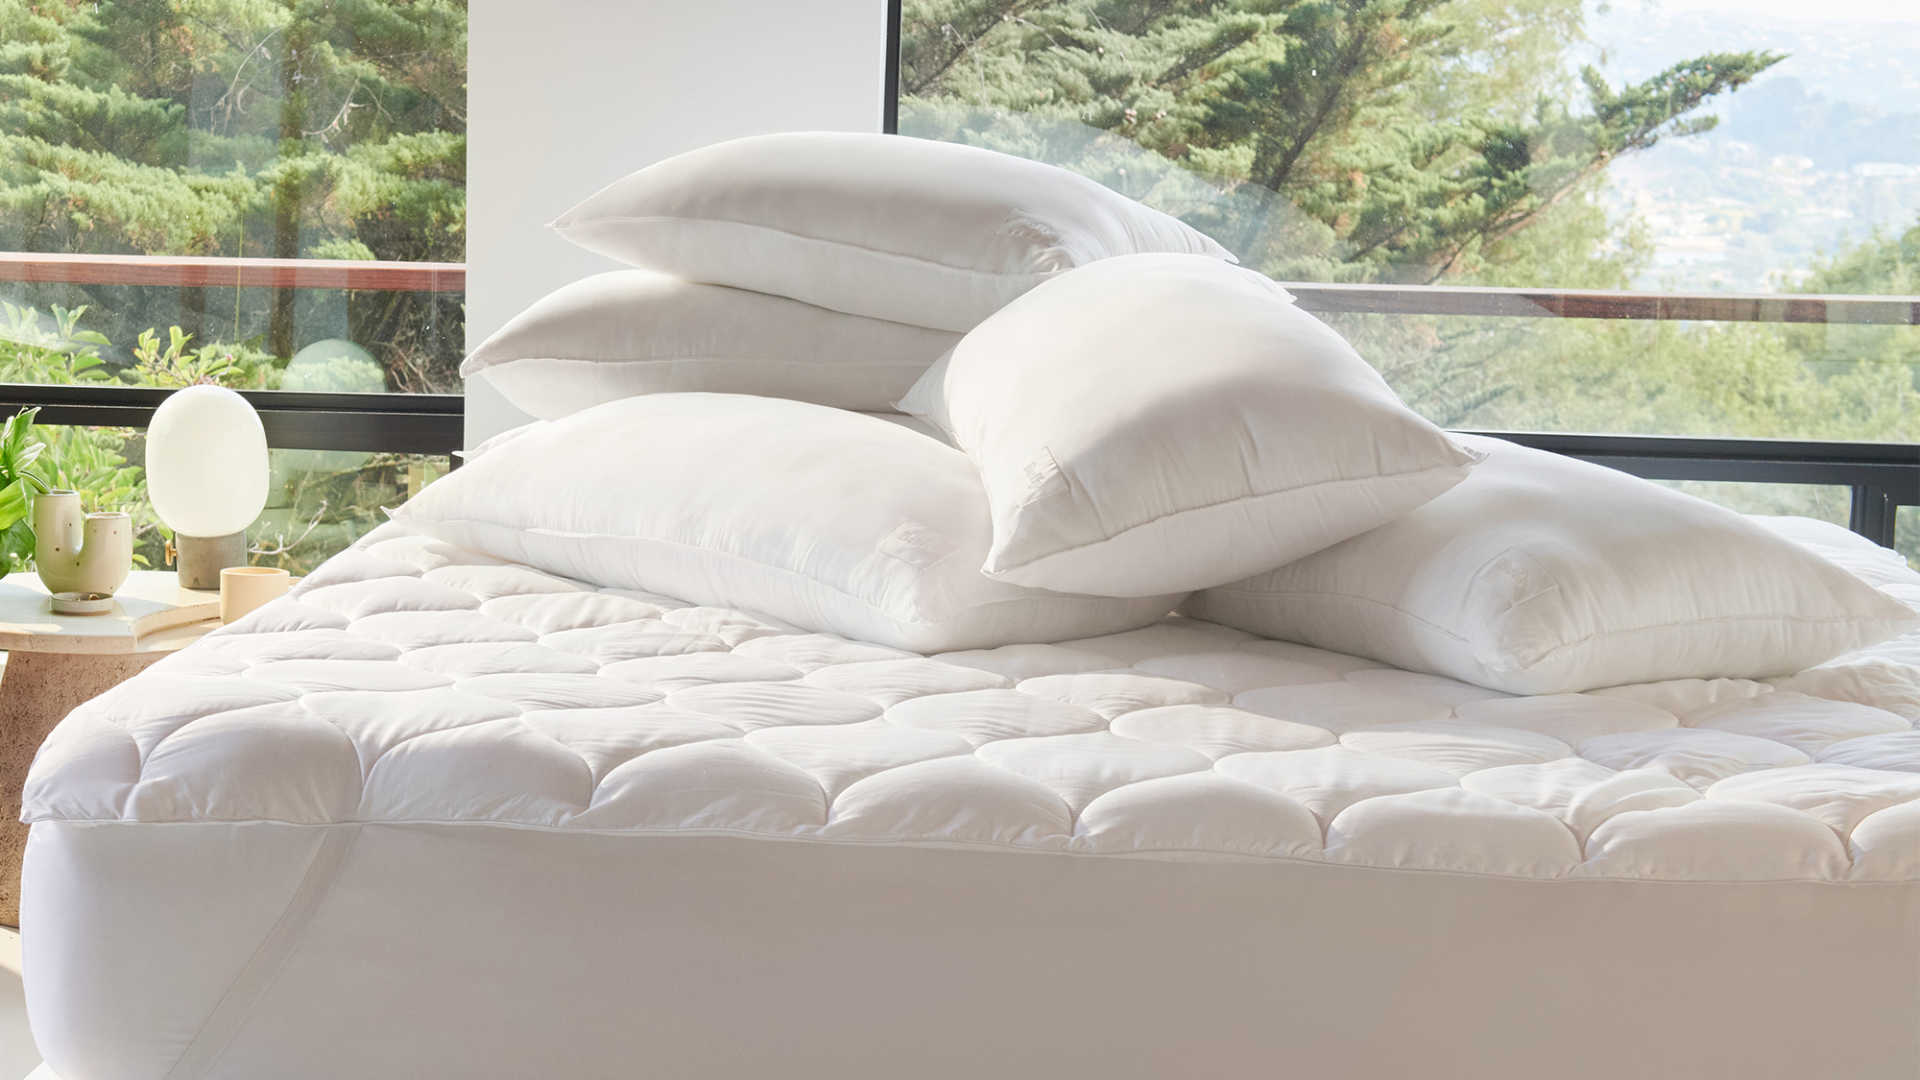 Unmade bed with pile of pillows and wall of windows with trees outside